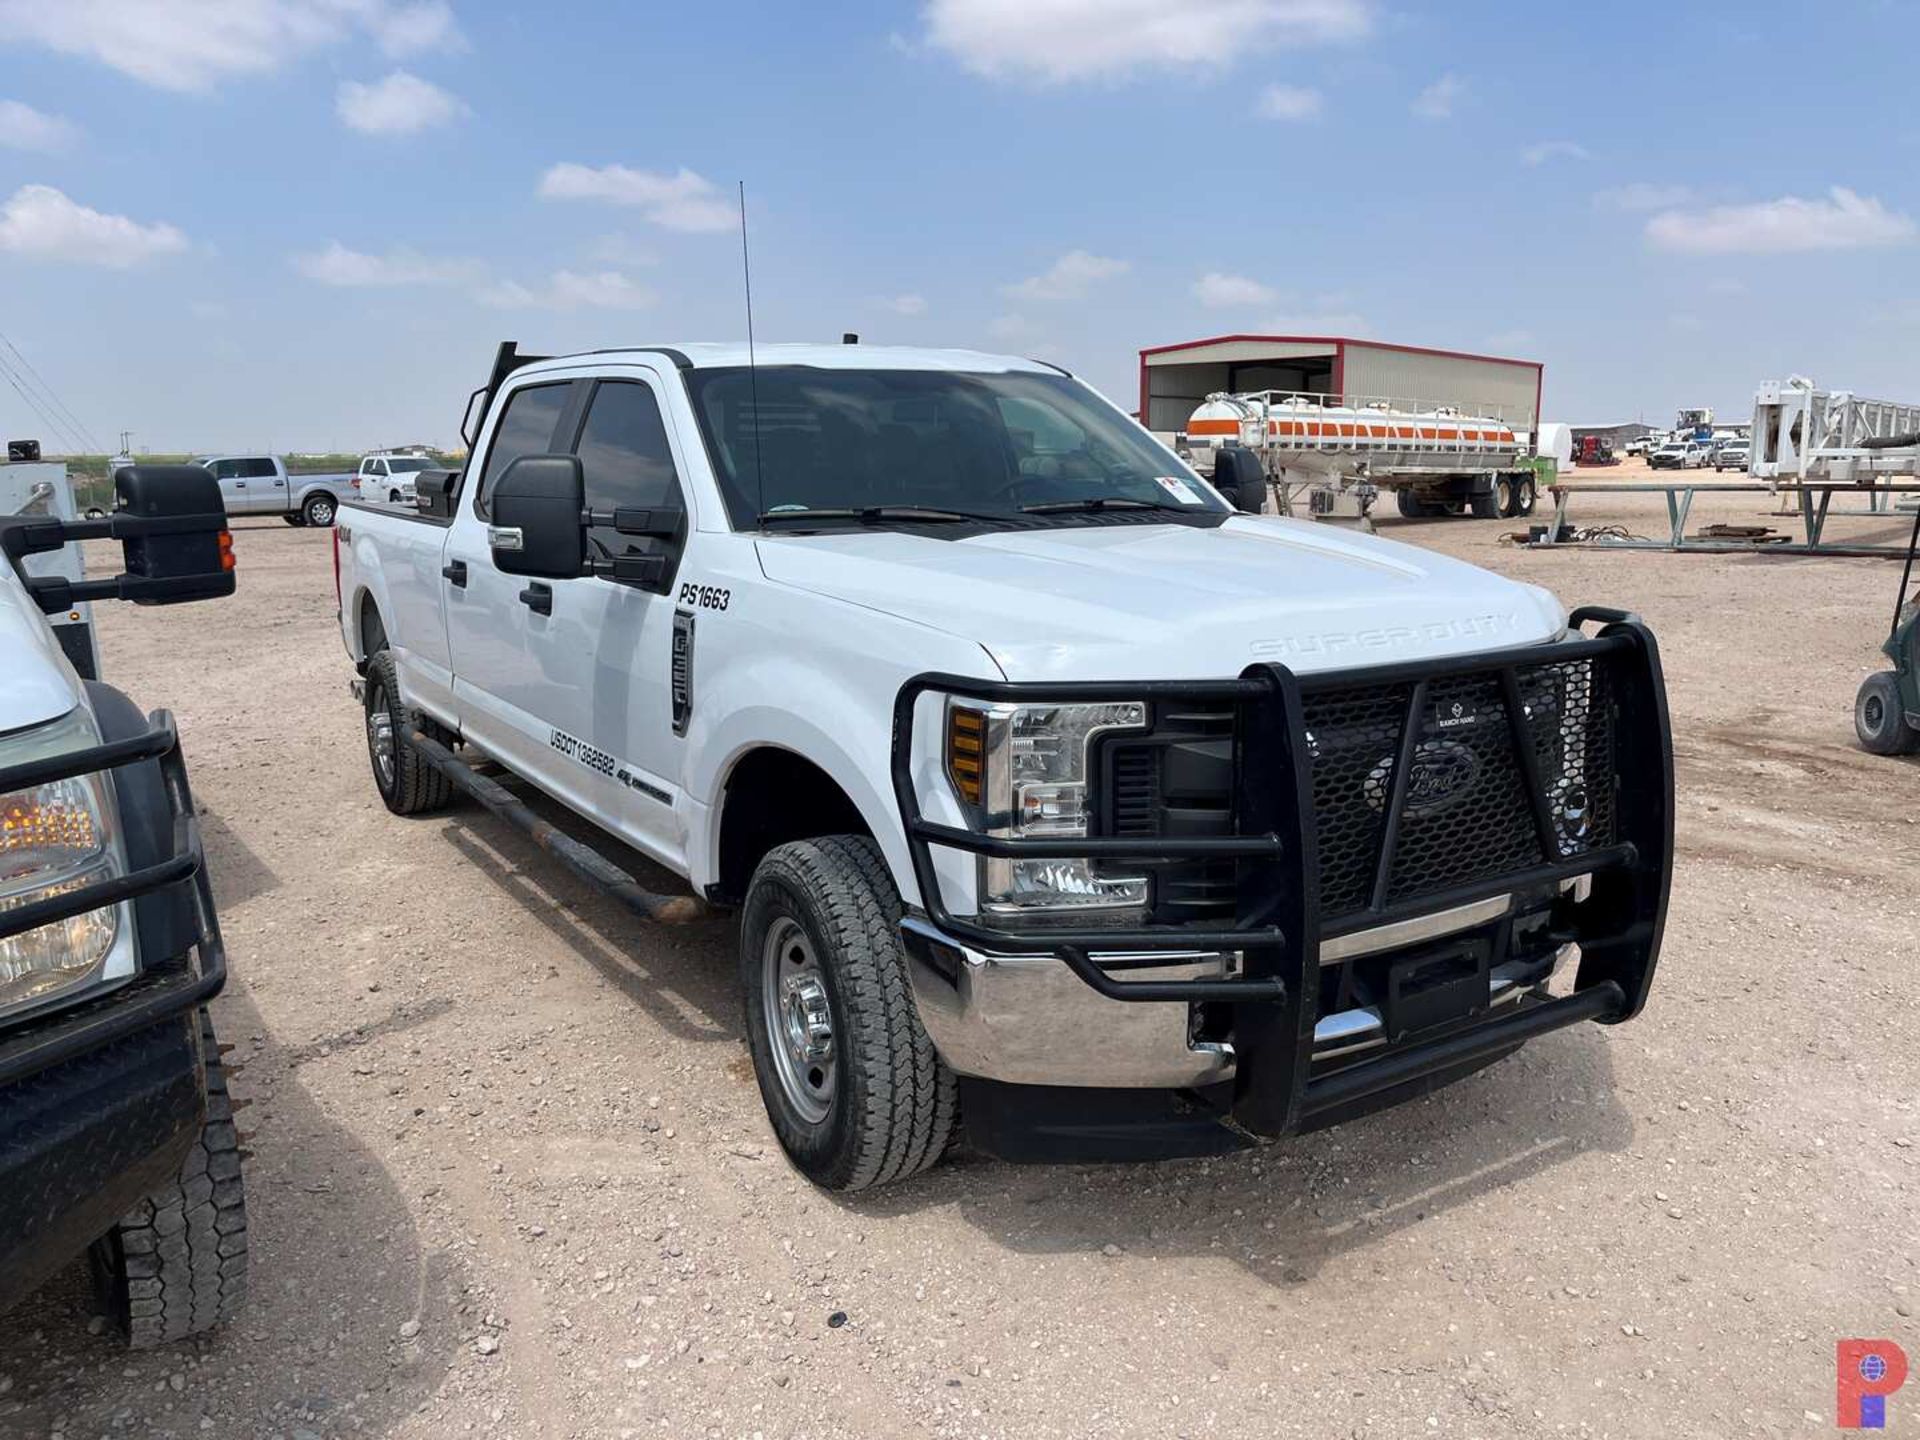 2018 FORD F-350 CREW CAB PICKUP TRUCK - Image 2 of 7